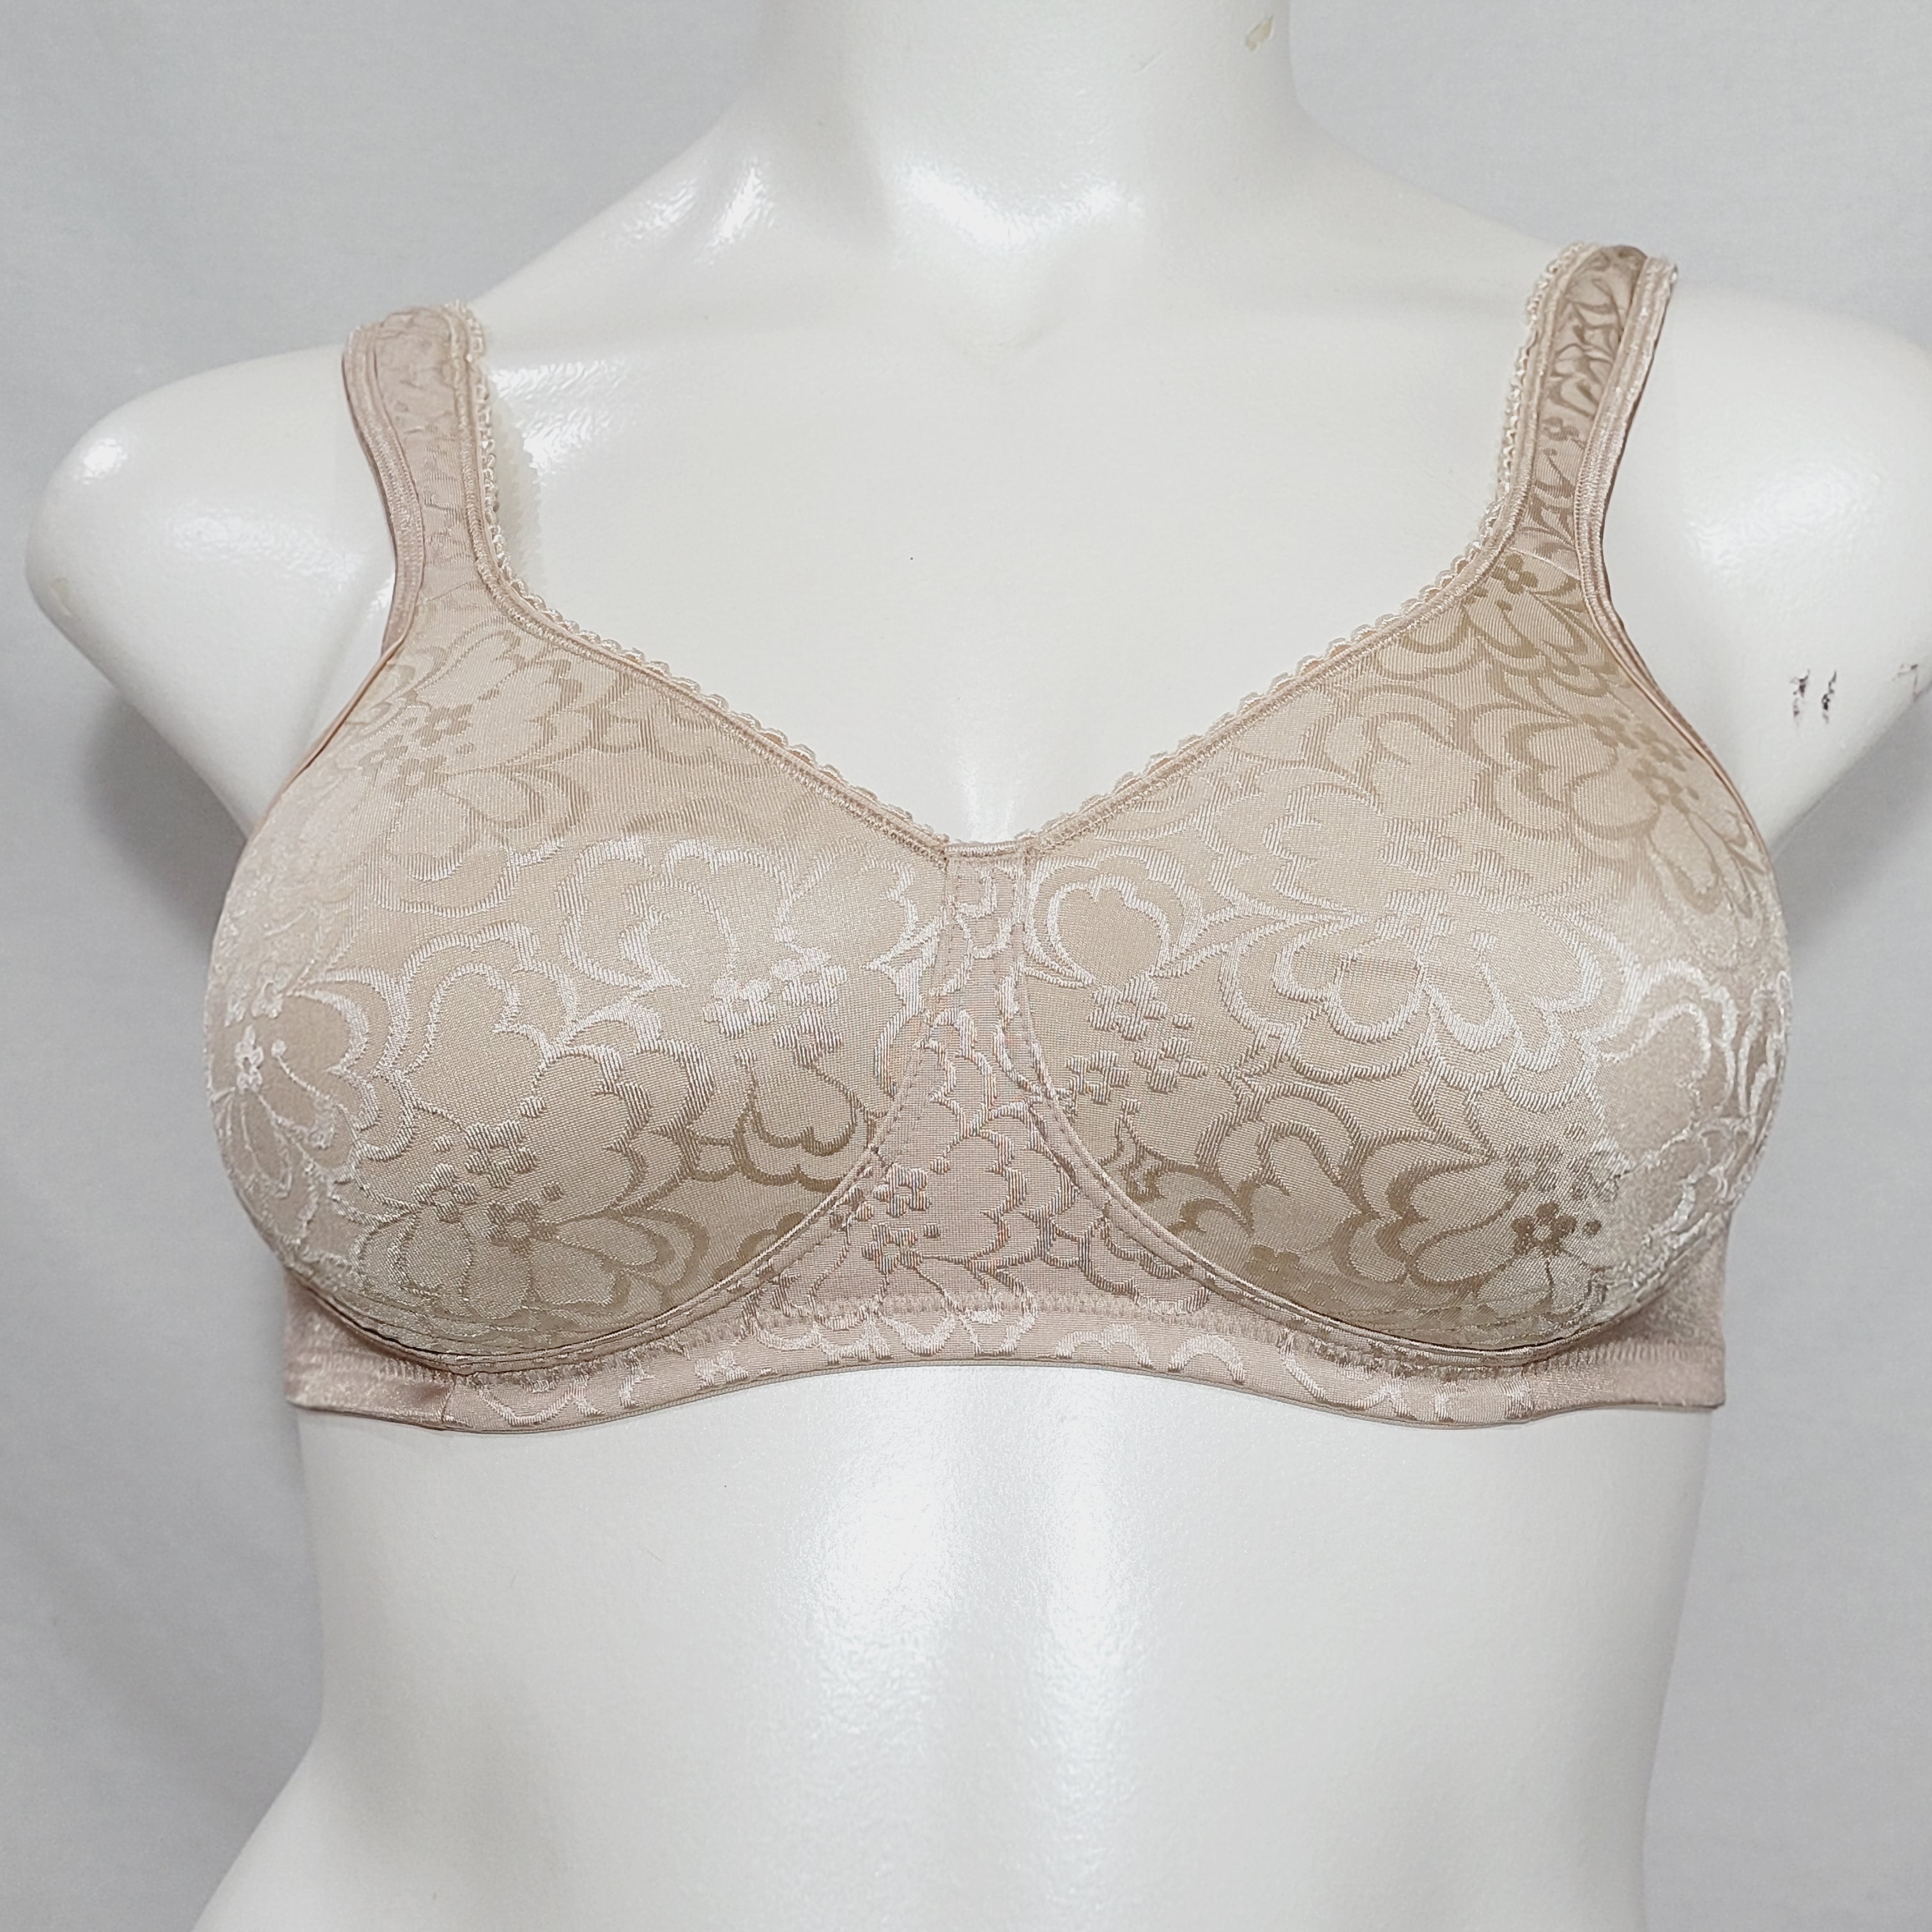 Cacique floral 36DDD balconette bra, Playtex 44DD white and nude